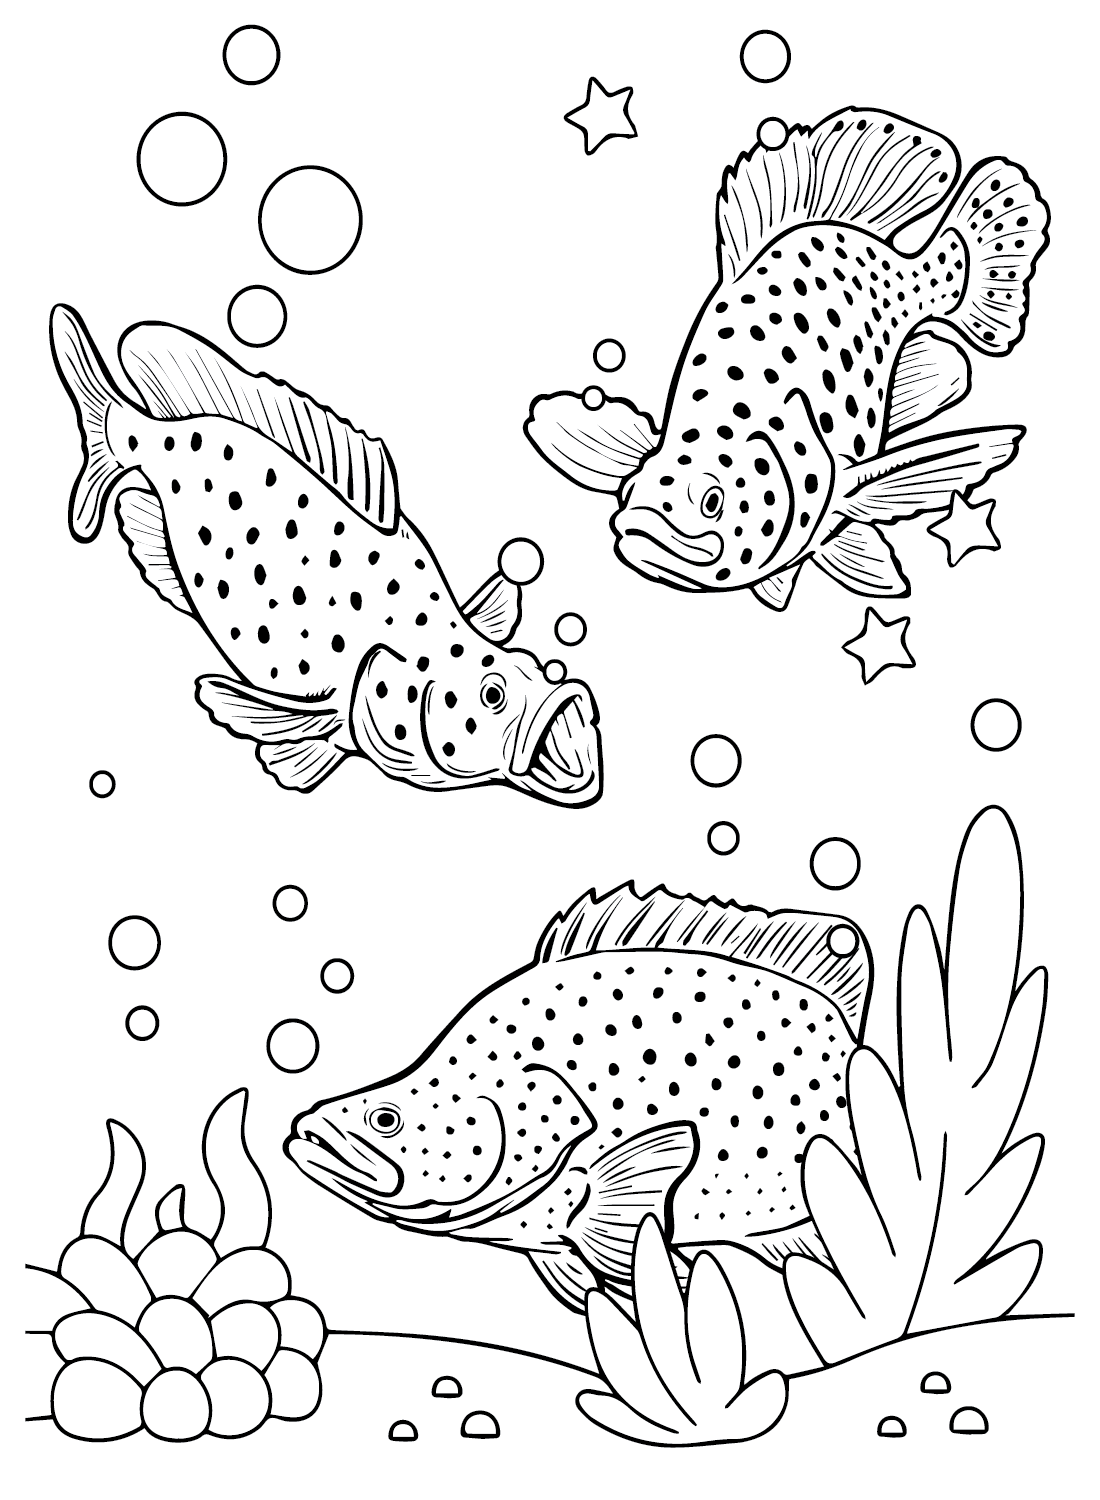 Groupers from Grouper